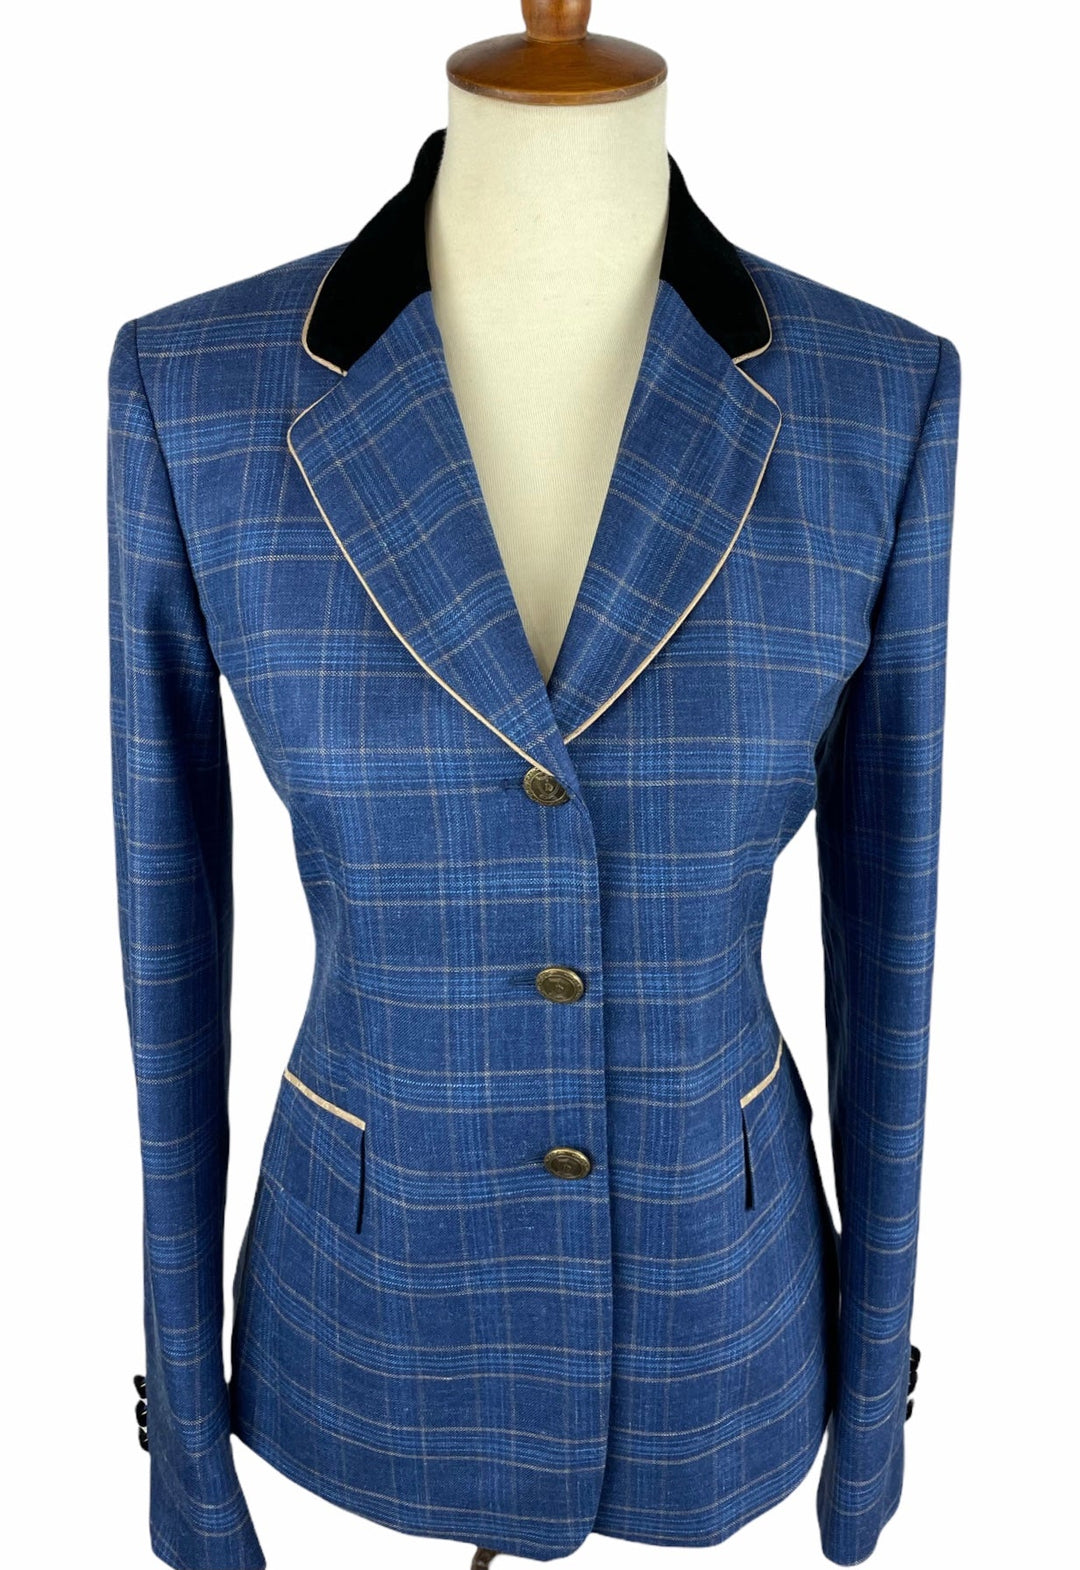 The Lucy Halter Jacket (Size 2)